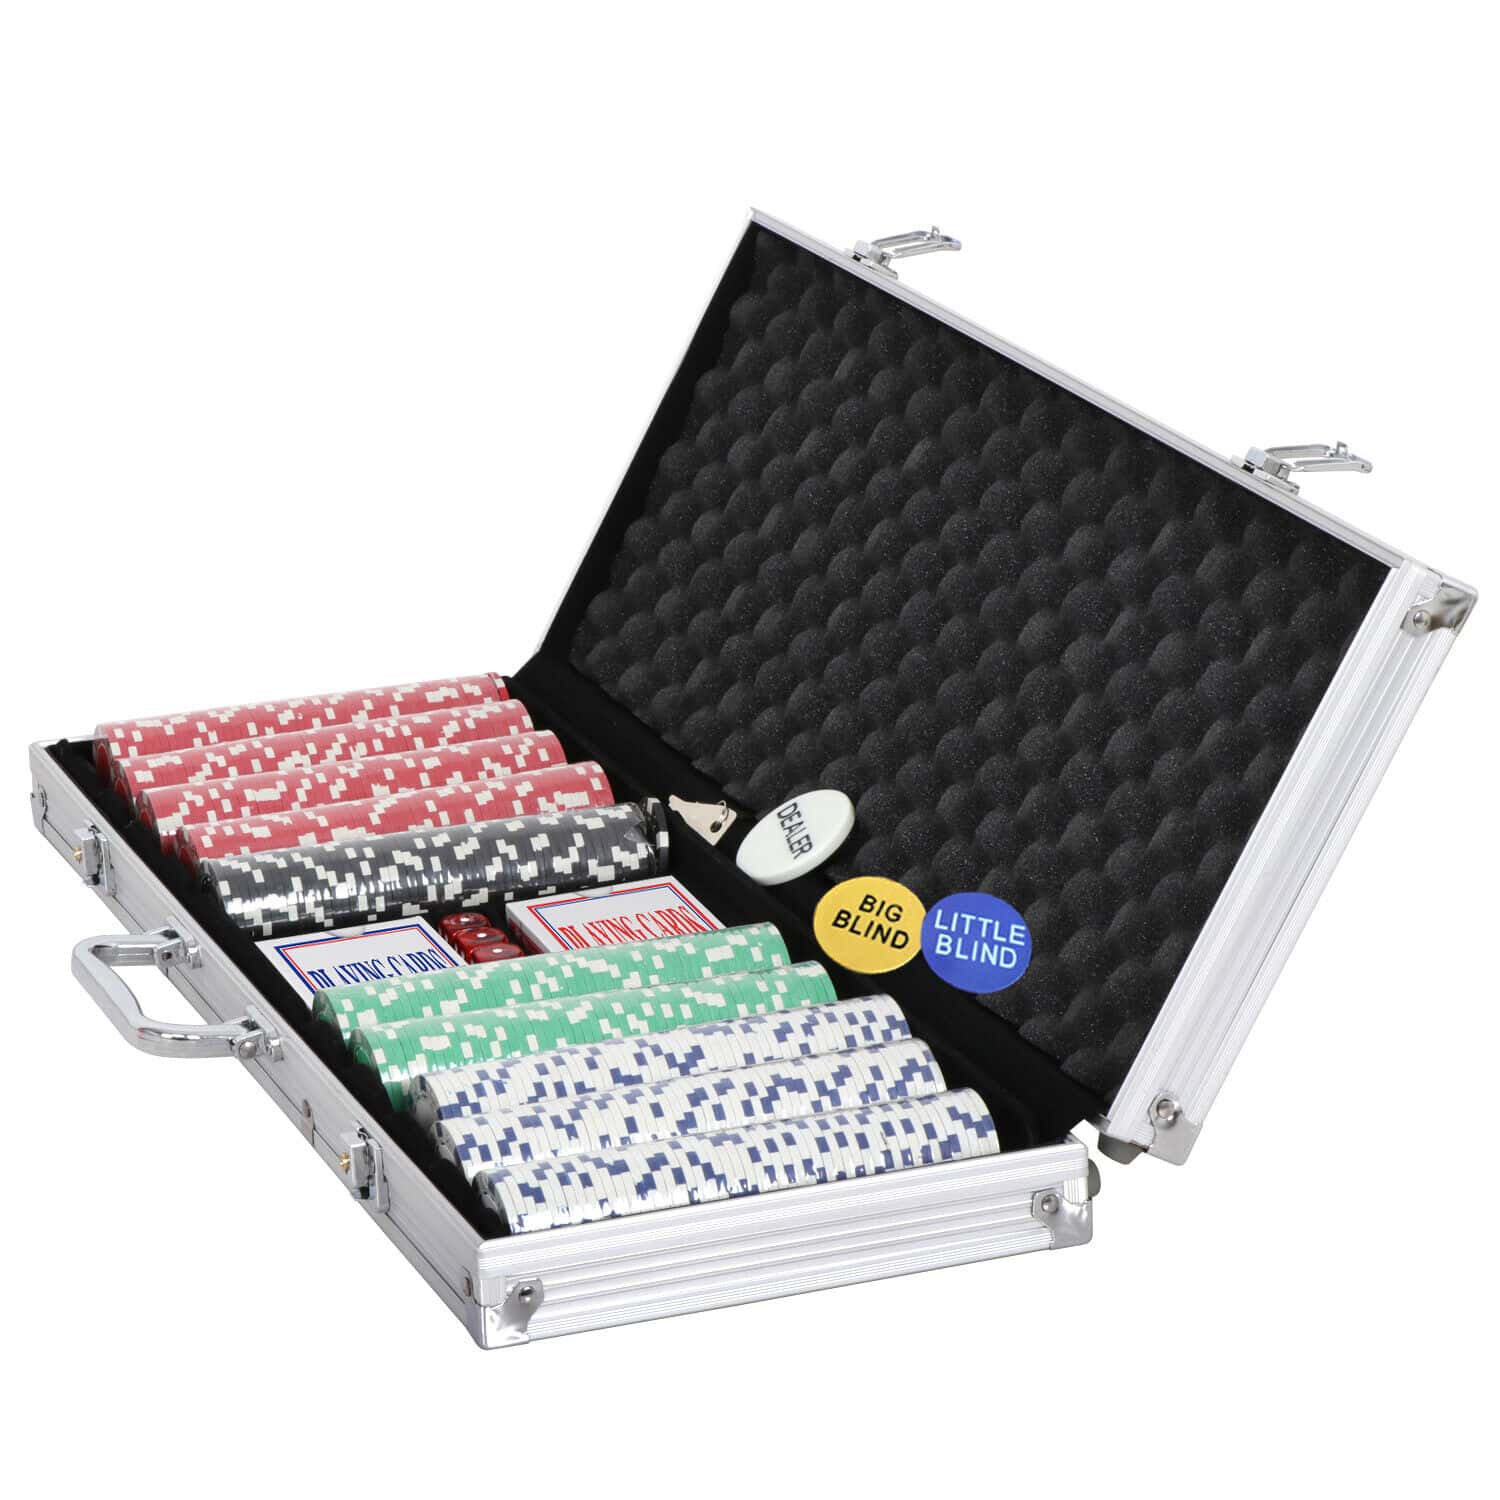 A set of poker chips in a case.